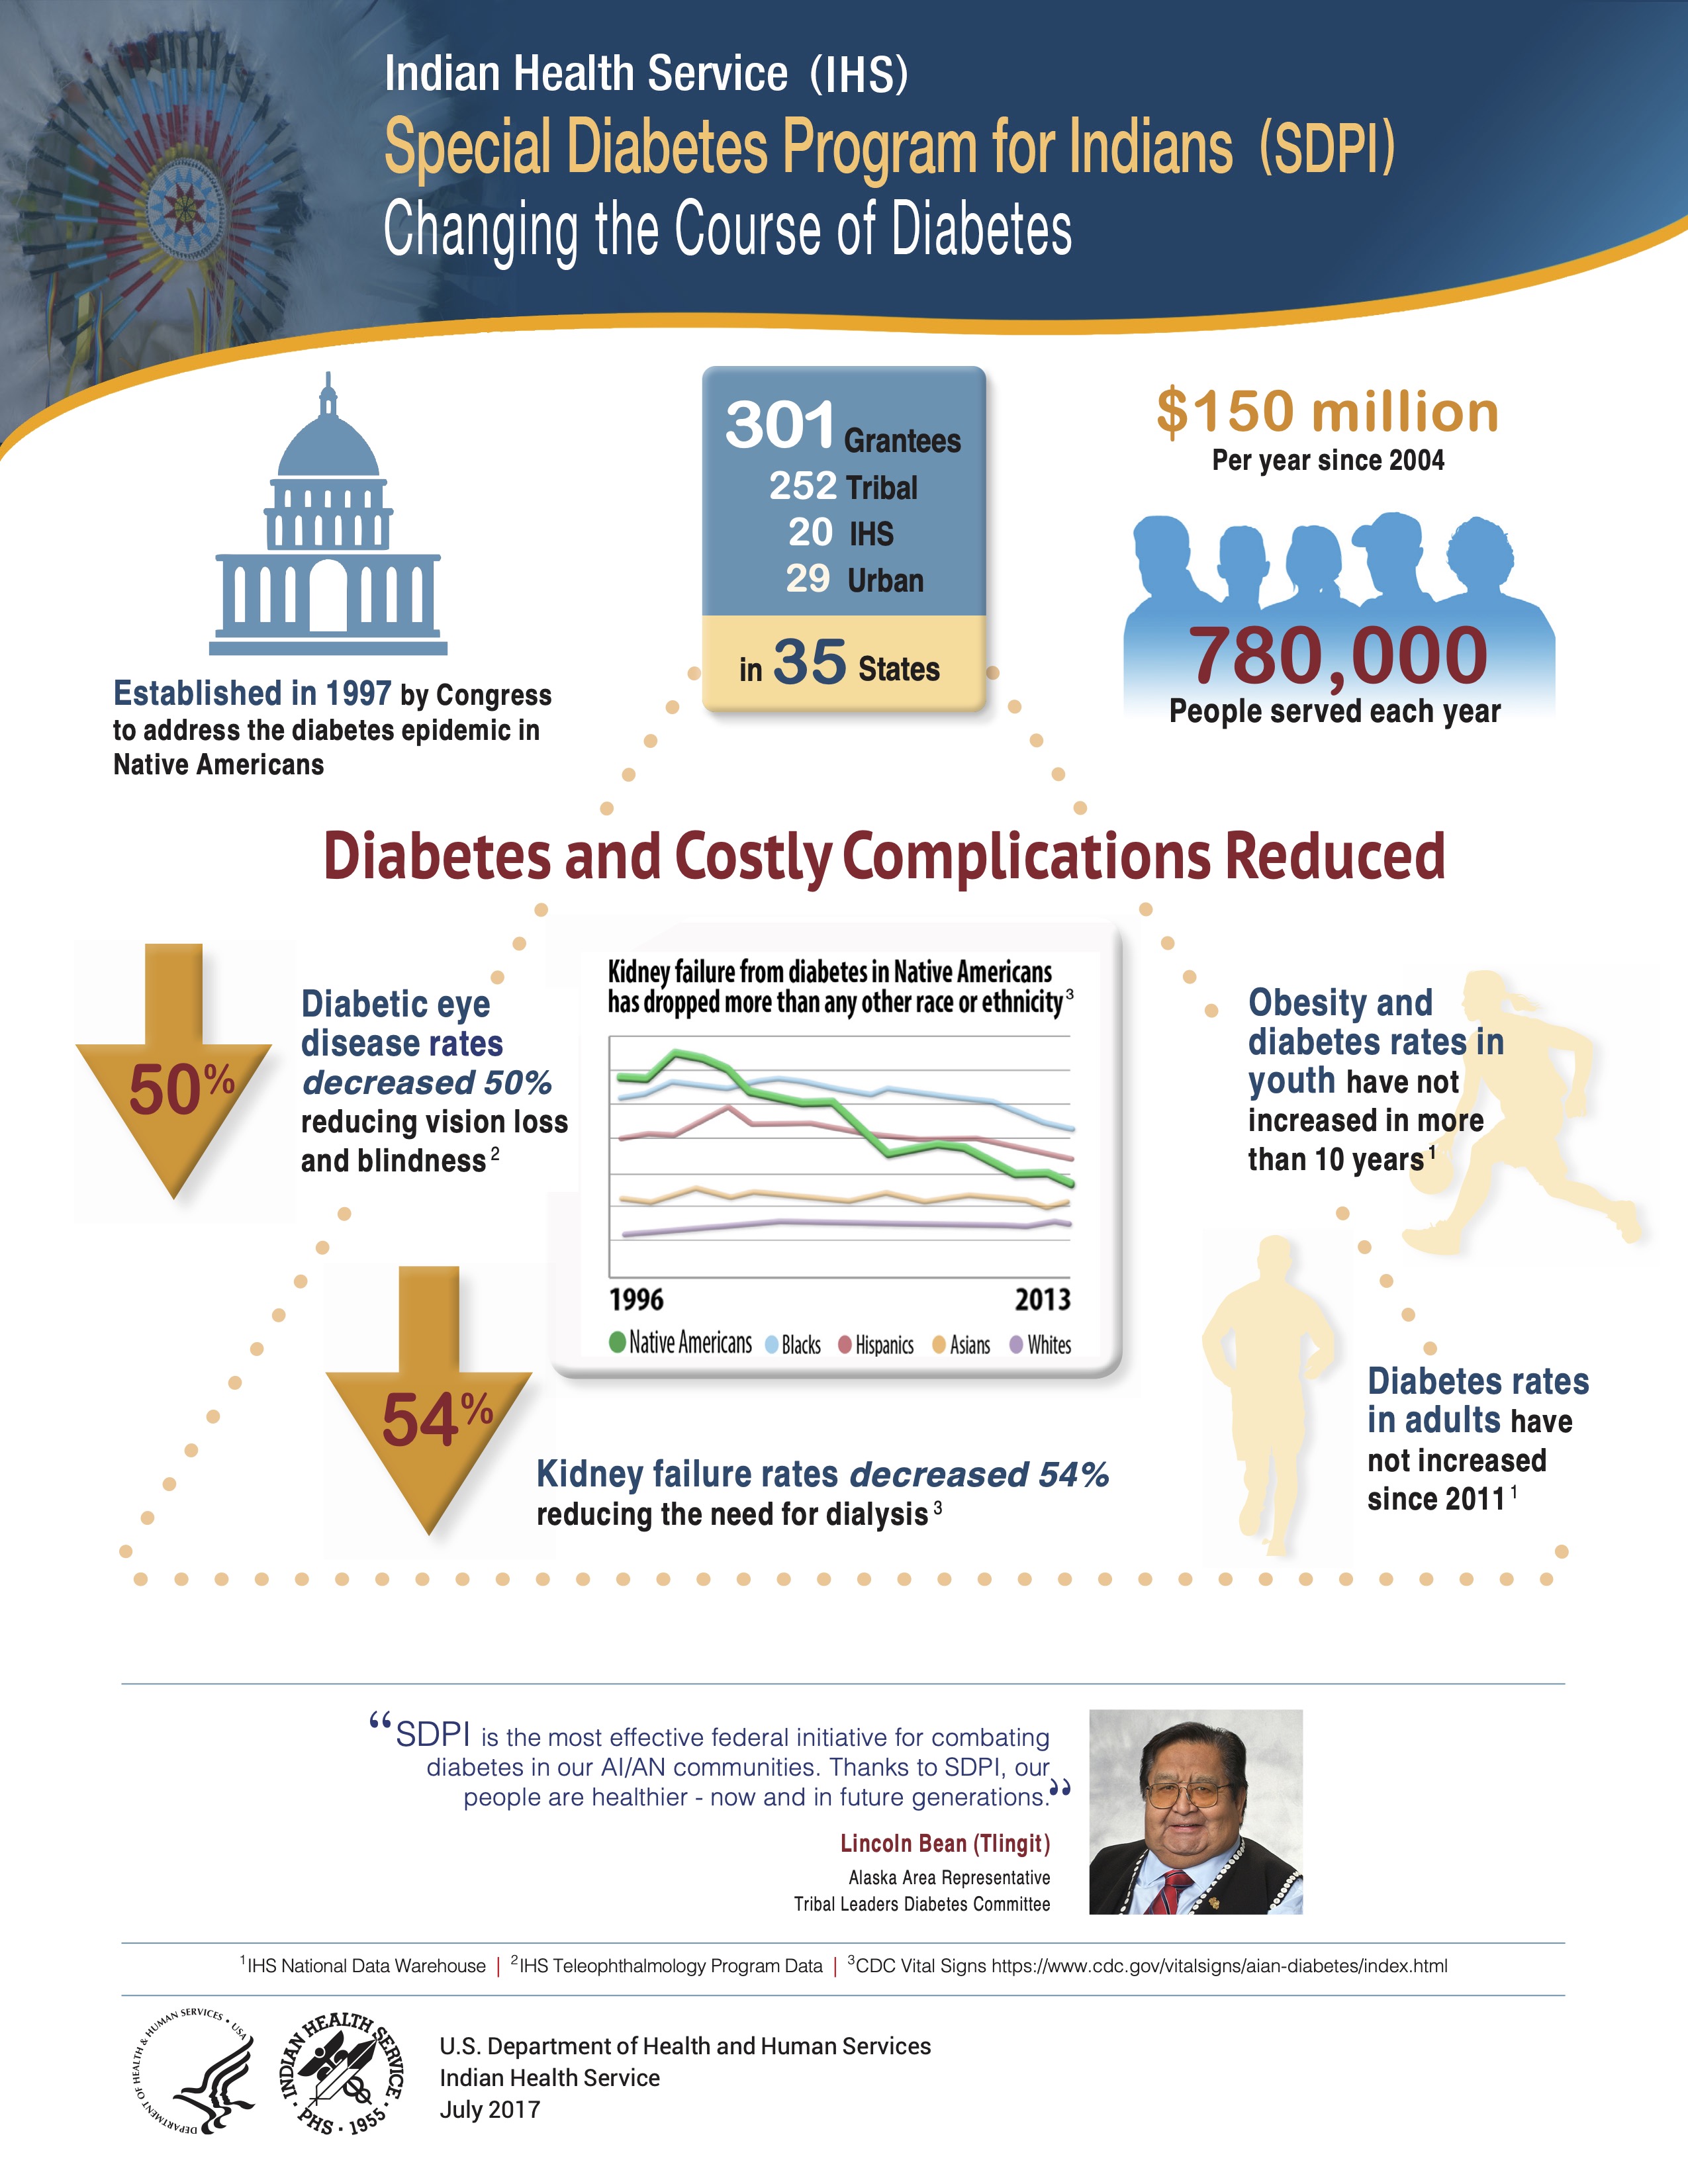 New study shows decrease in diabetes prevalence for American Indian and